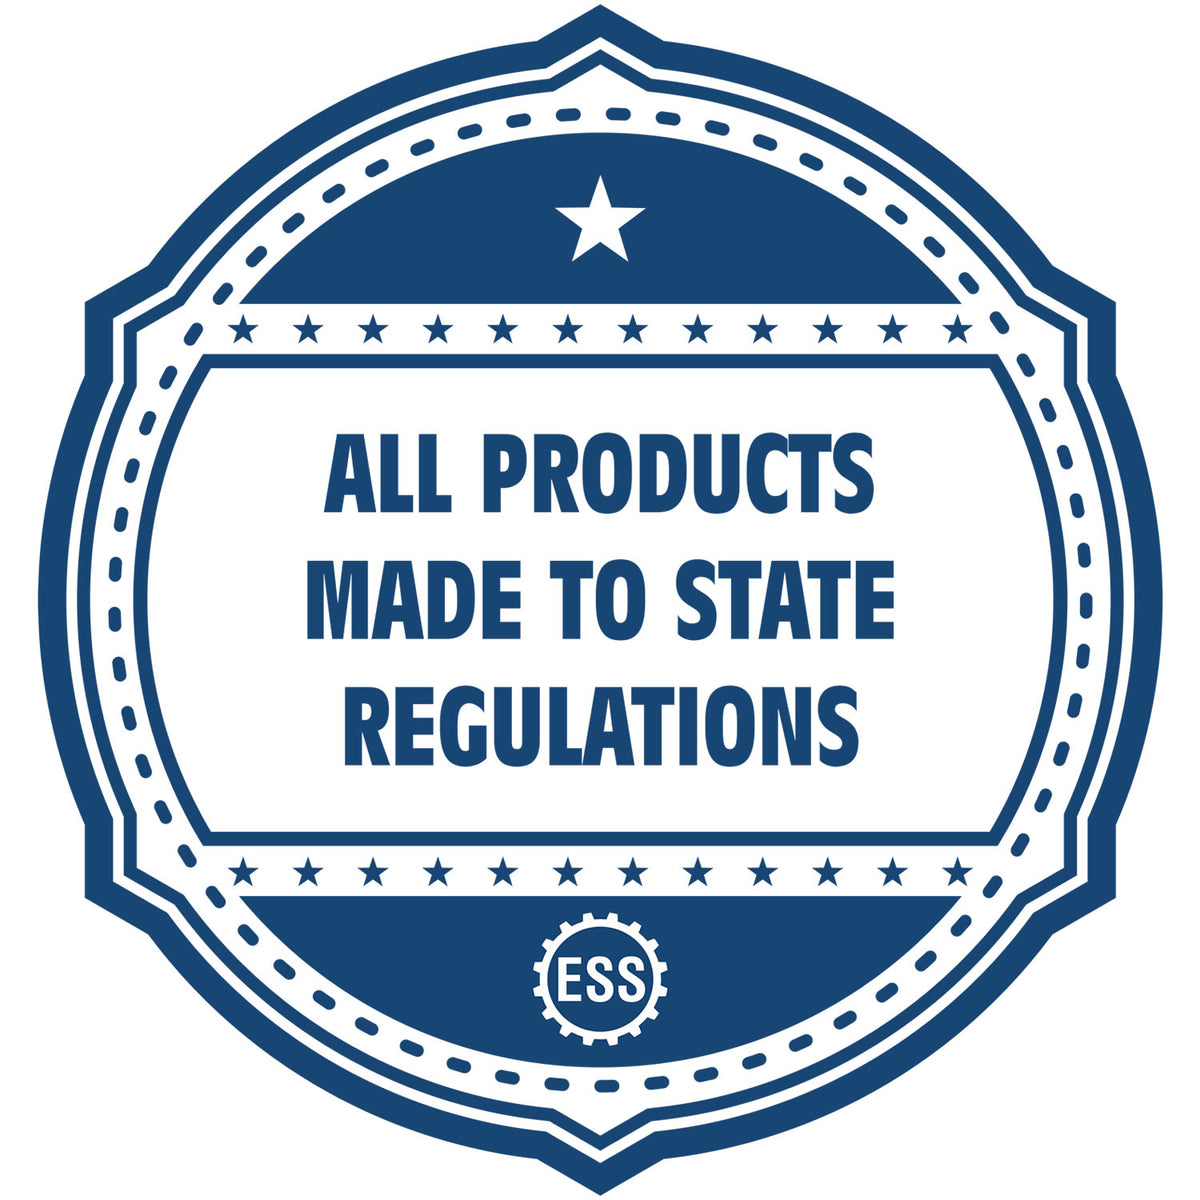 A blue icon or badge for the Hybrid Tennessee Landscape Architect Seal showing that this product is made in compliance with state regulations.